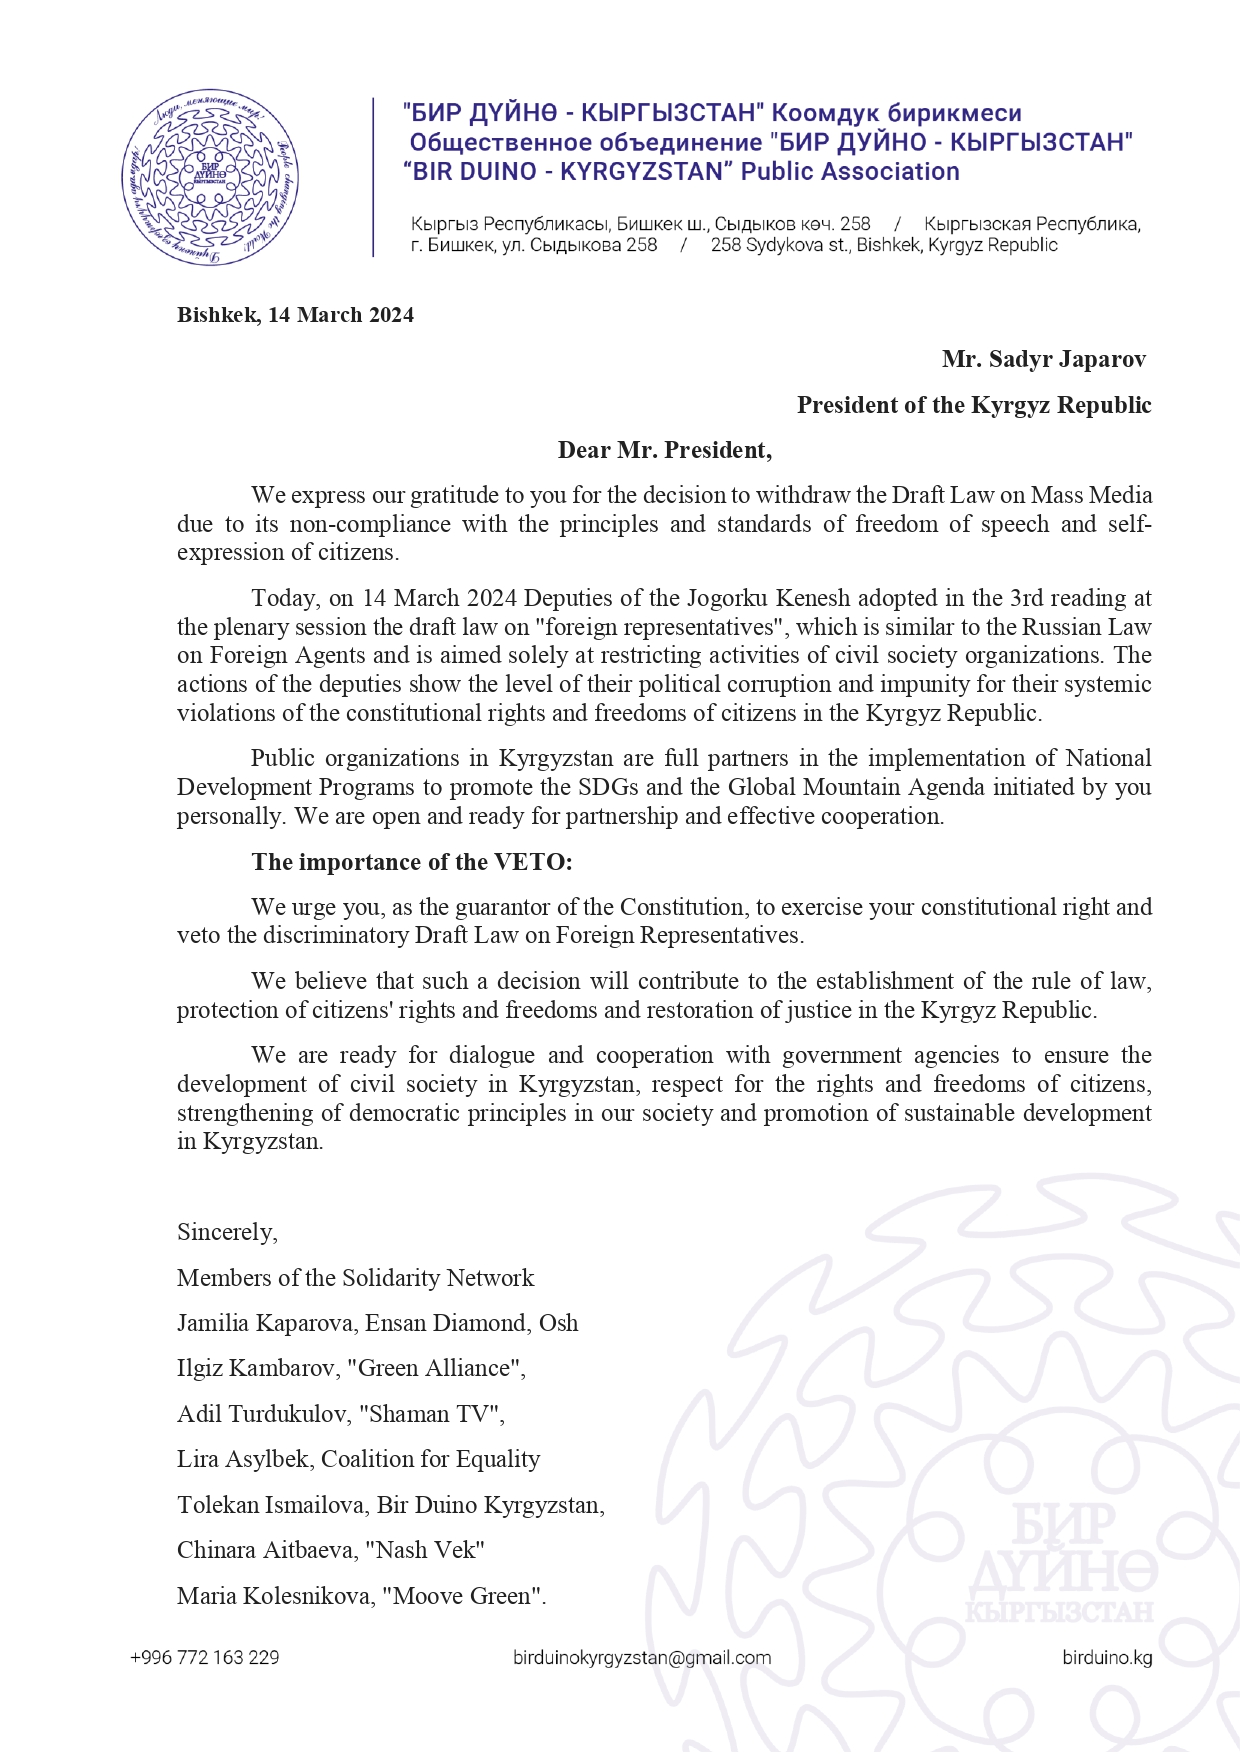 Joint appeal of civil society organizations to the President of the Kyrgyz Republic on the draft law on foreign representatives